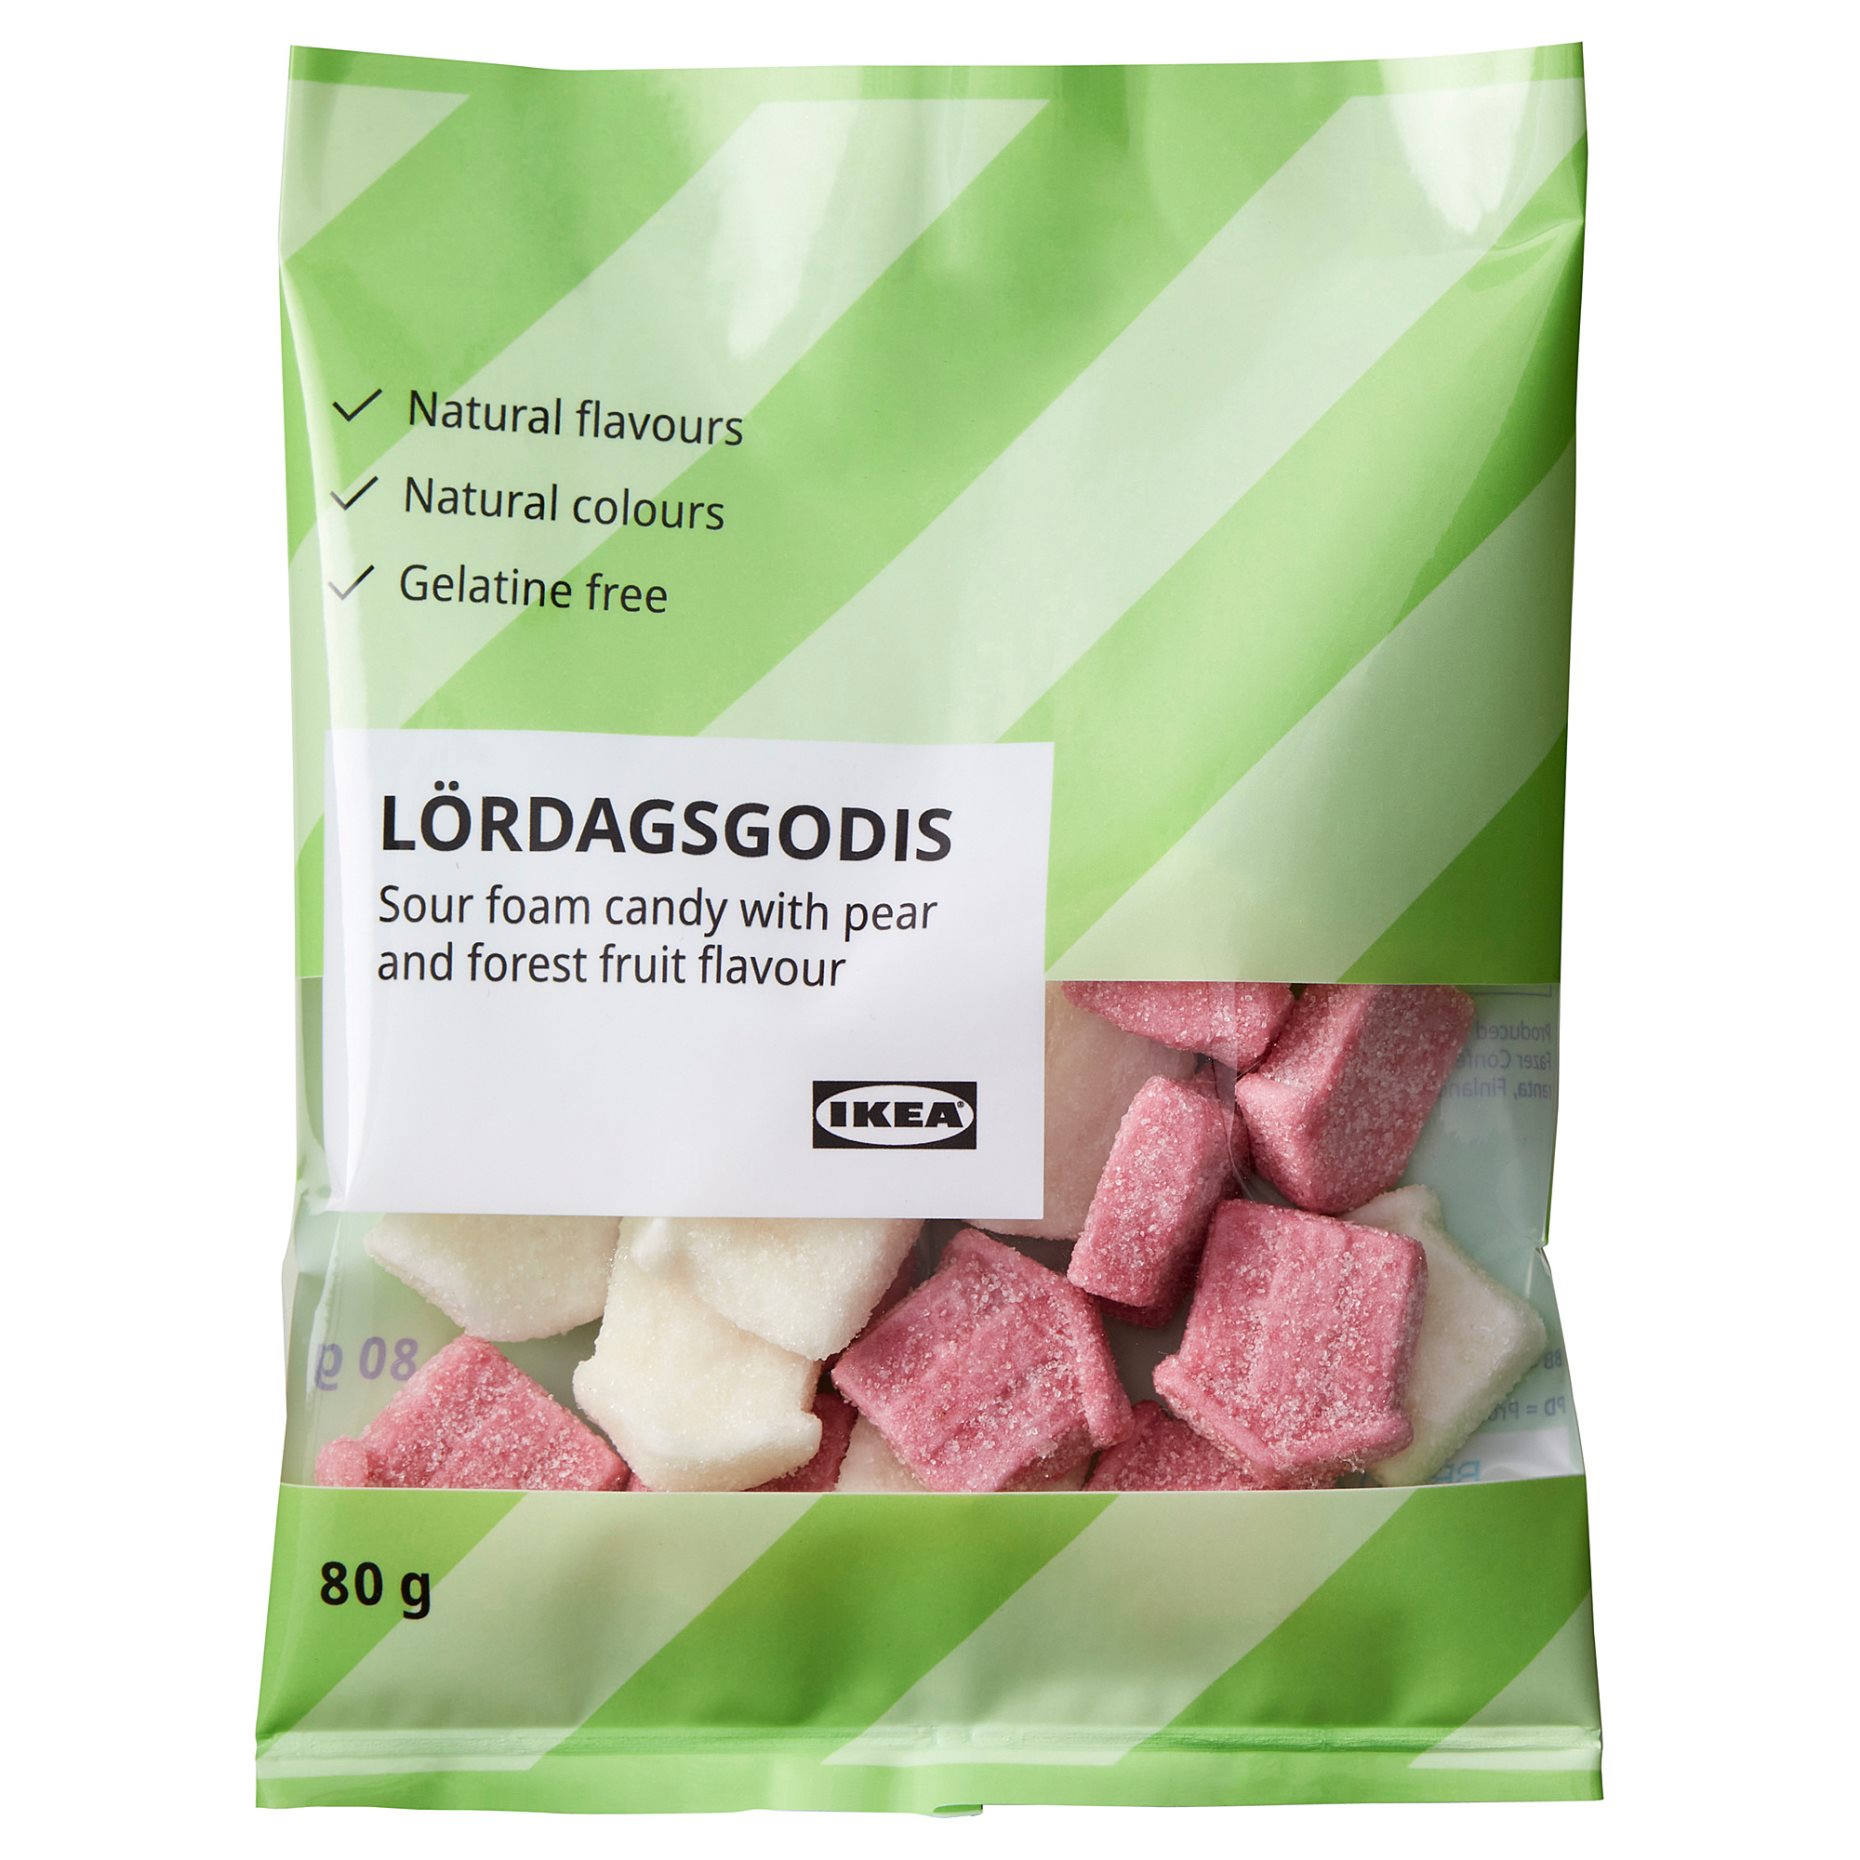 LORDAGSGODIS sour foam candy with pear or forest fruit flavour, 80 g ...